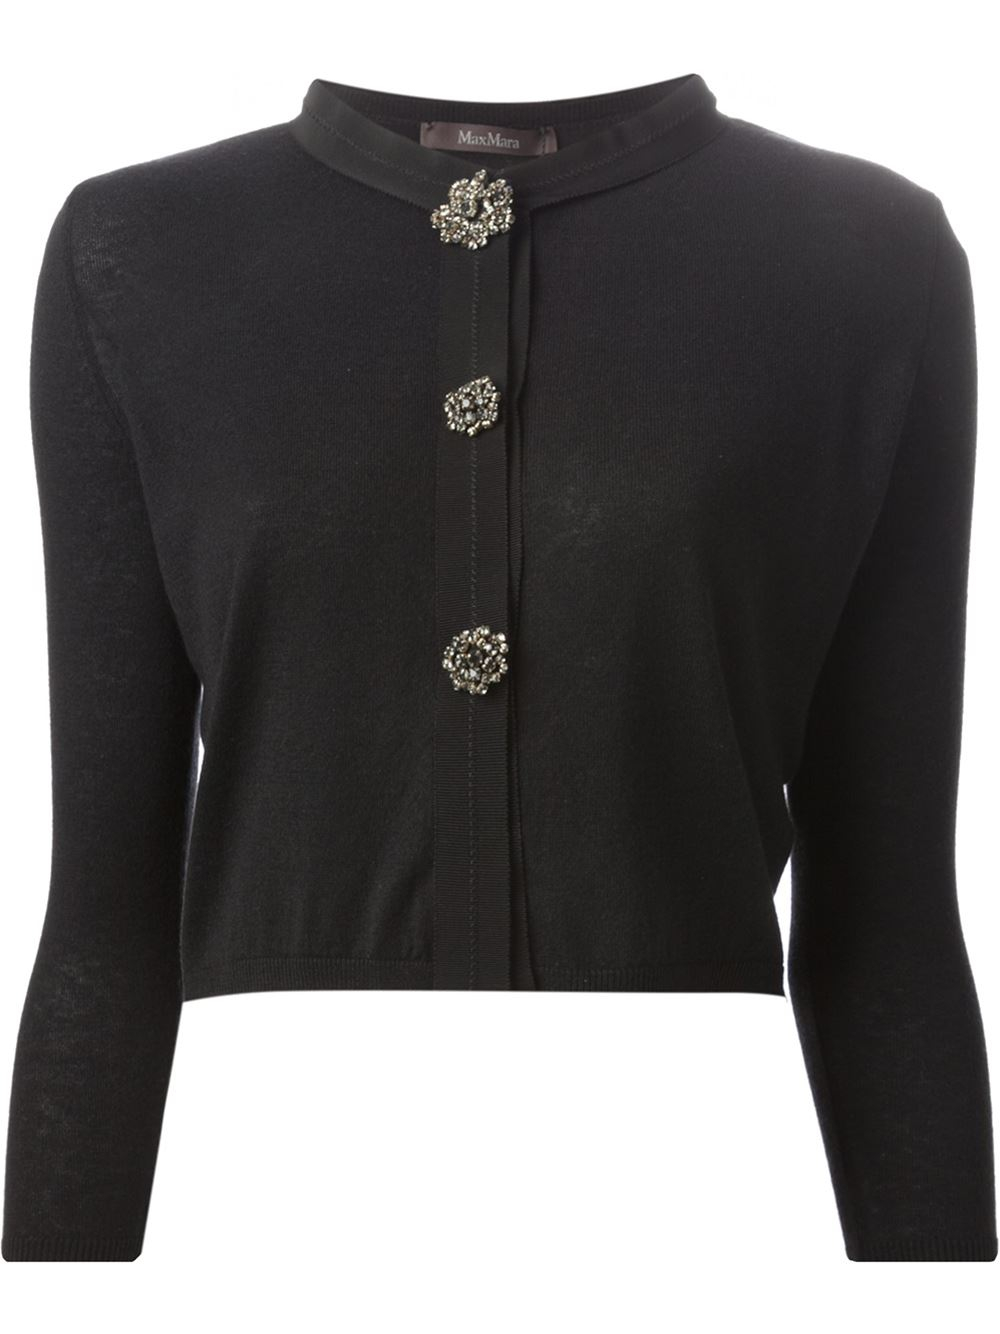 Lyst - Max Mara Embellished Button Cropped Cardigan in Black